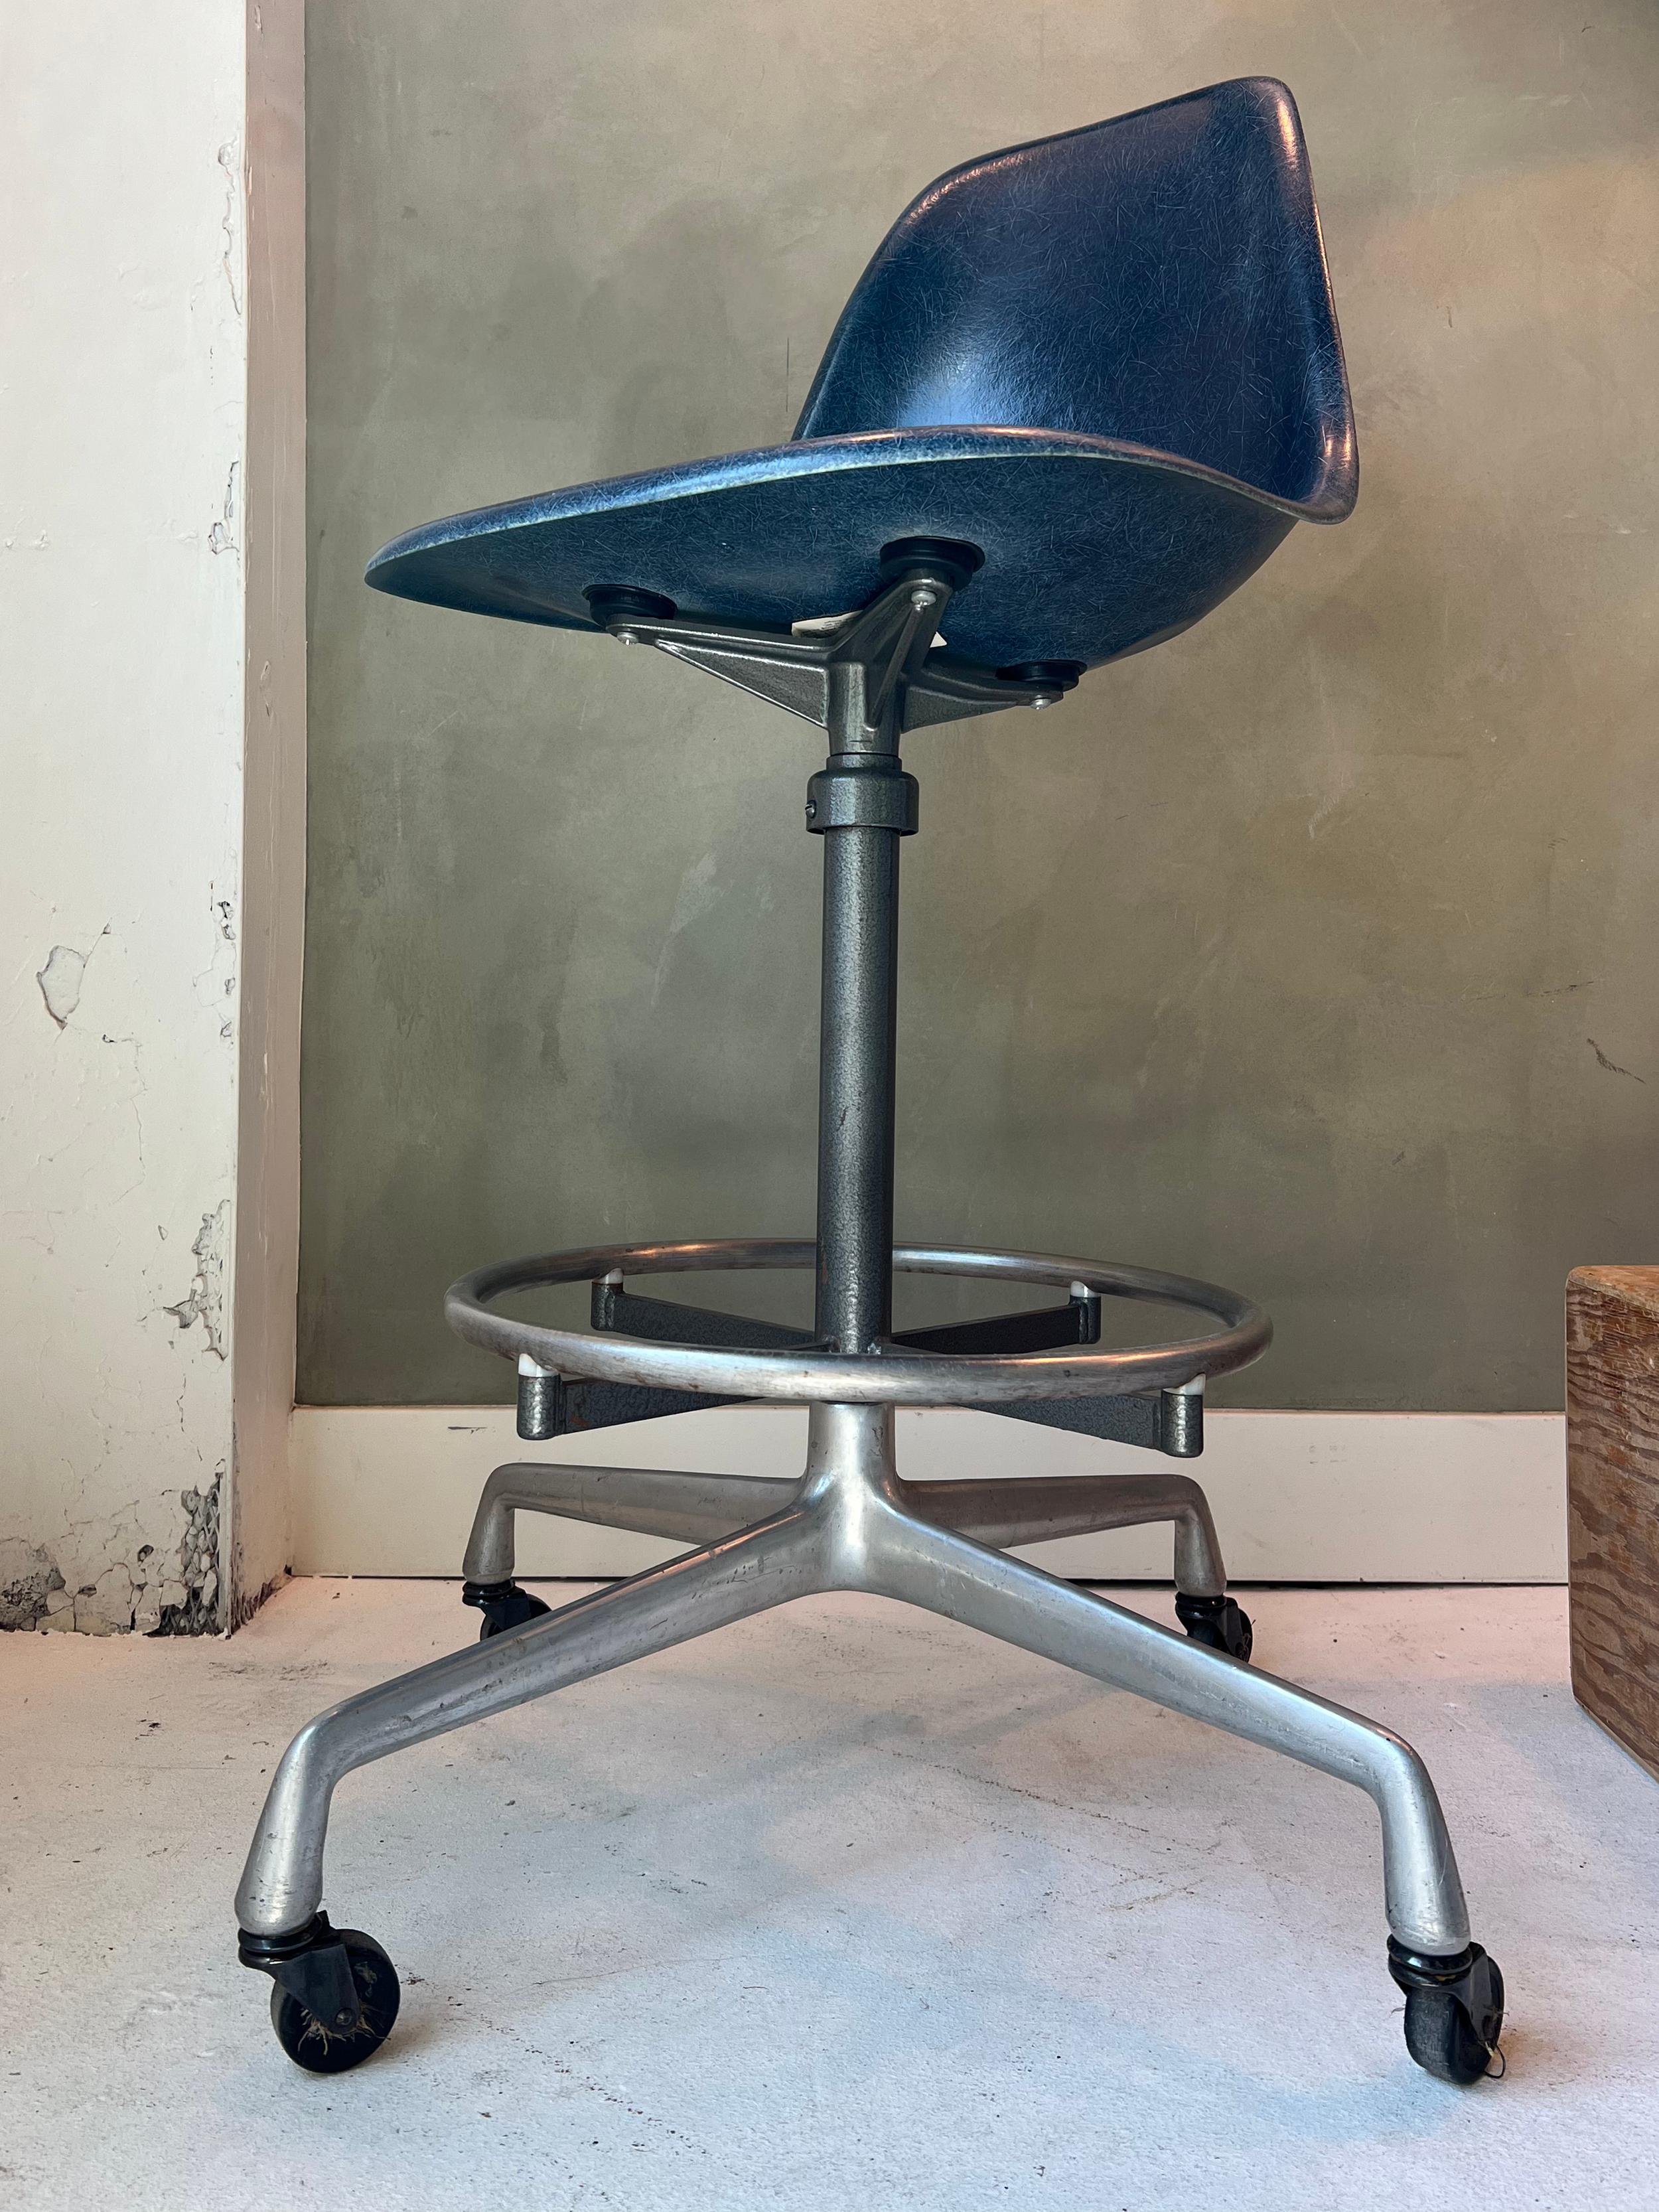 Vintage Eames drafting stool with navy blue fiberglass shell chair. In amazing condition for the age; the color is deep and saturated and the steel shows wear consistent with age. Swivels and adjusts easily. 